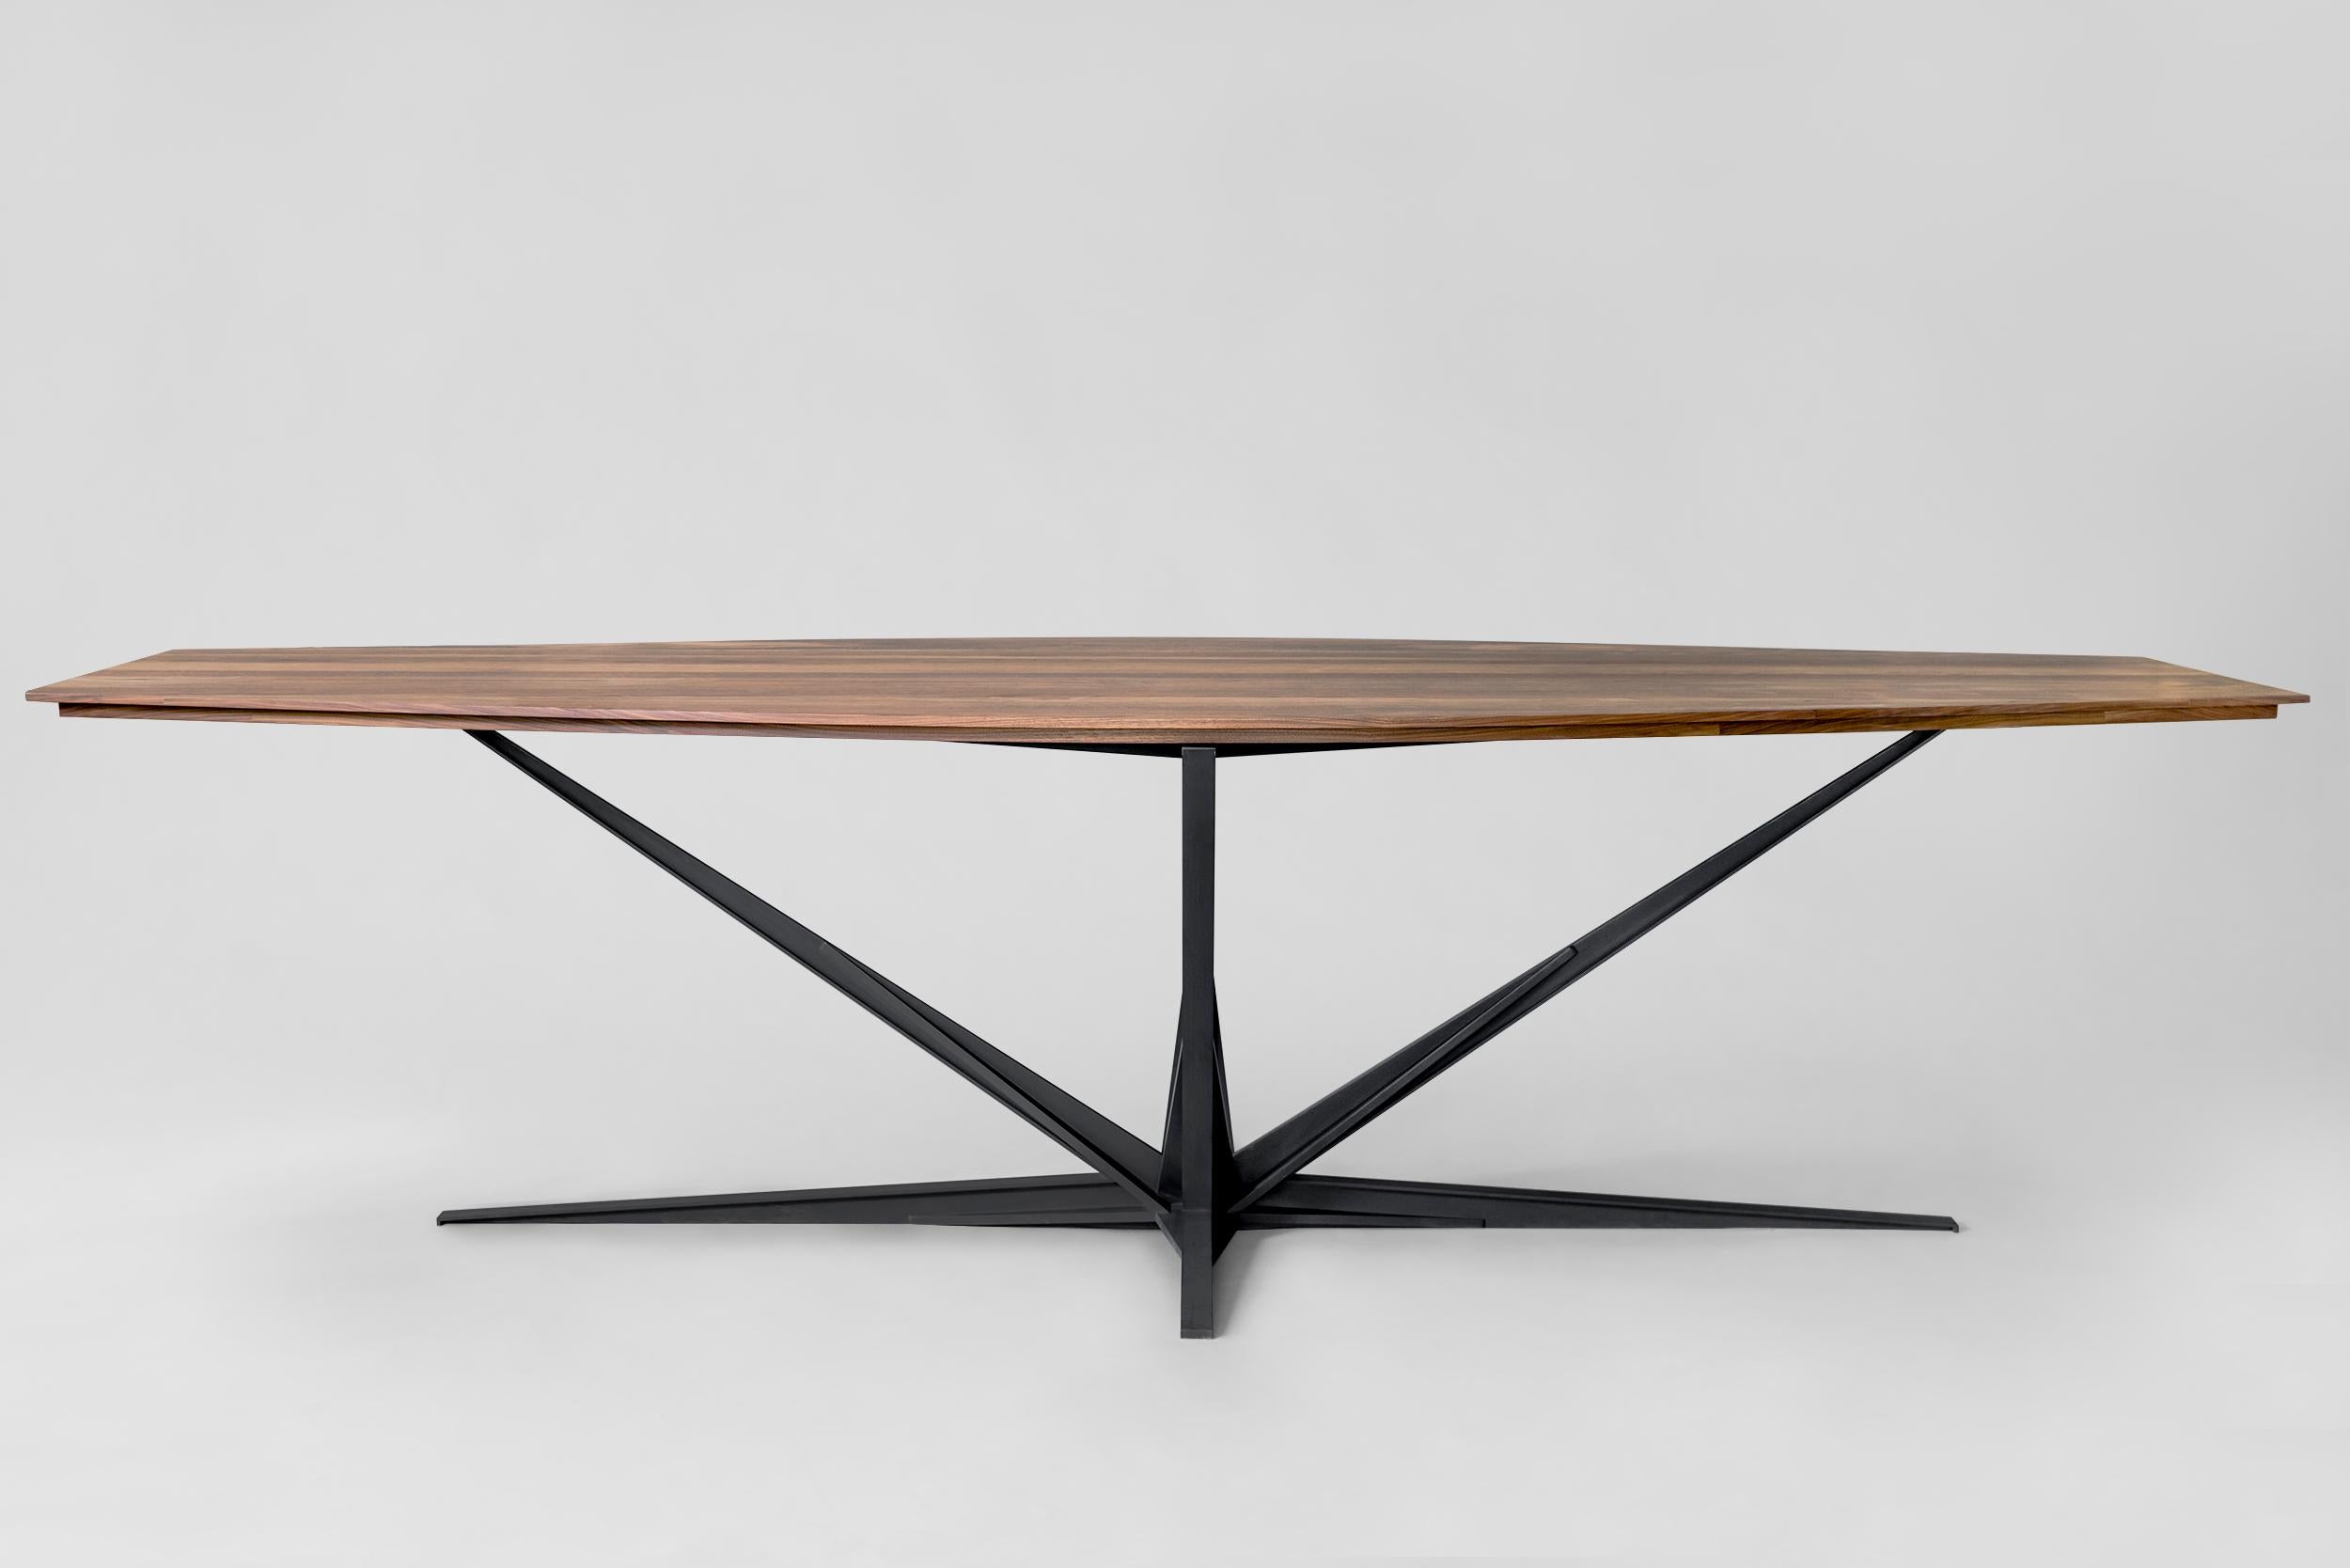 Mexican Agave Dining Table by Atra Design